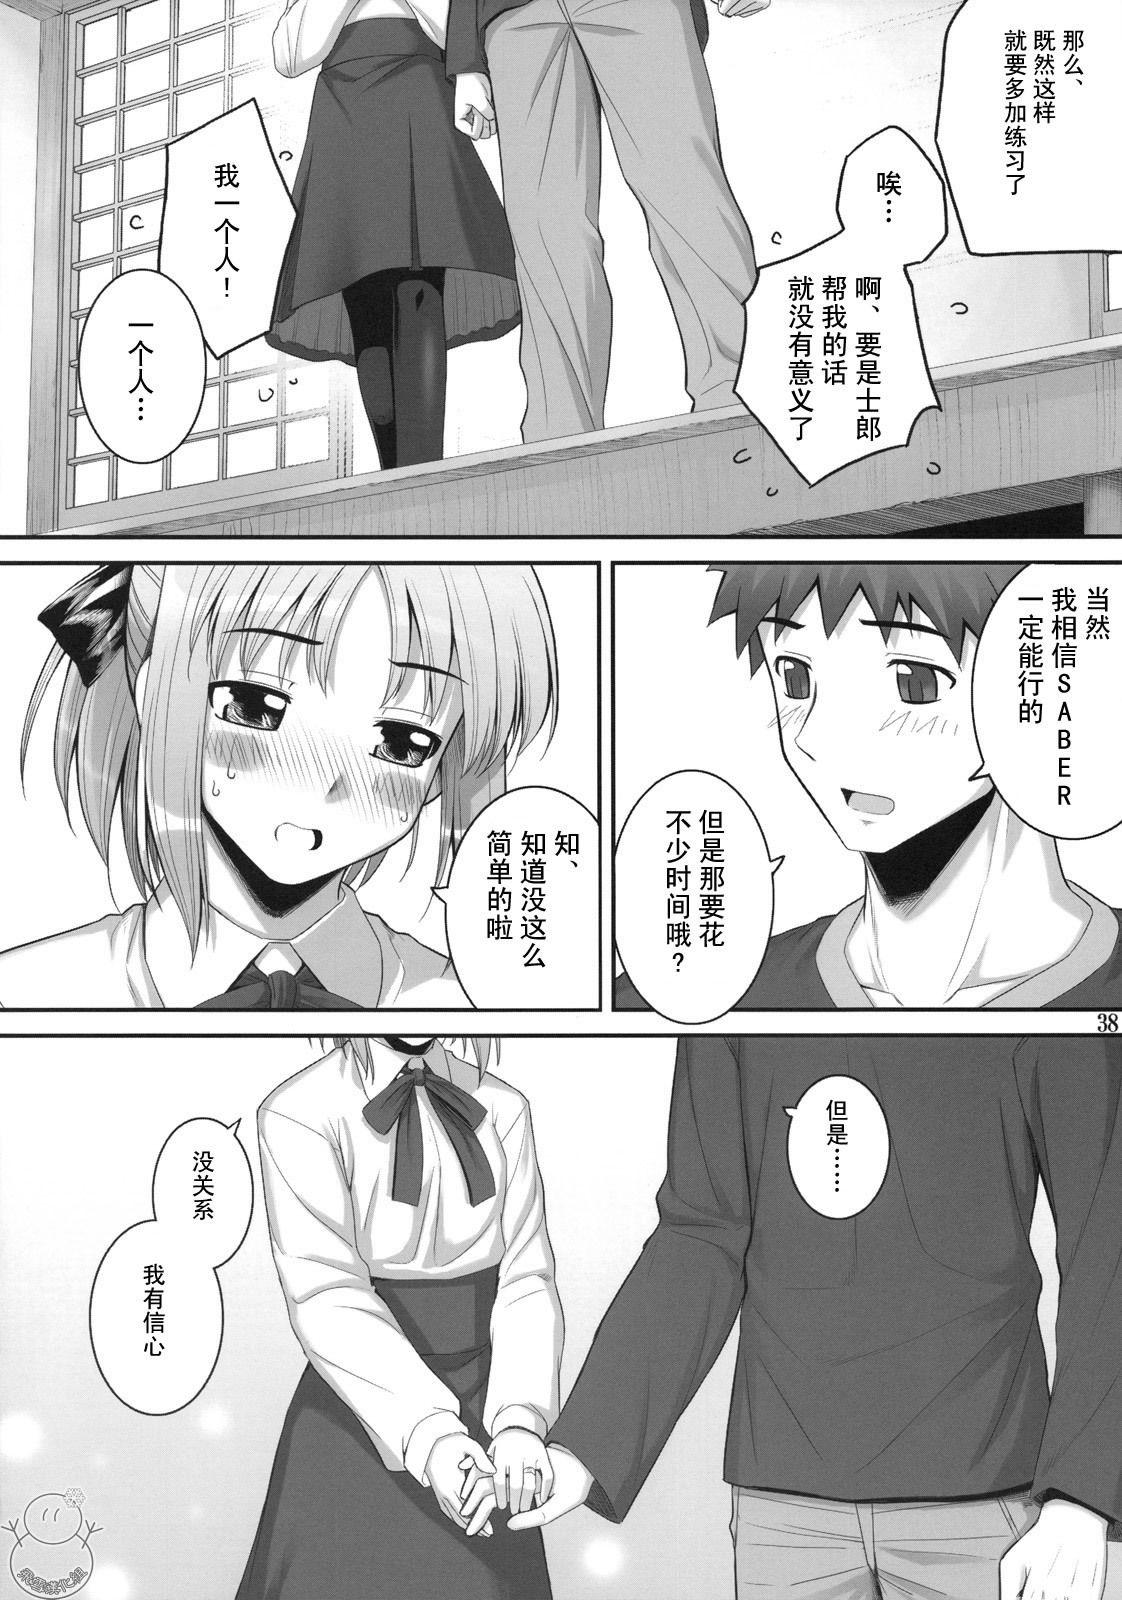 (C75) [RUBBISH Selecting Squad (Namonashi)] RE 10 (Fate/stay night) [Chinese] [飞雪汉化组] page 37 full